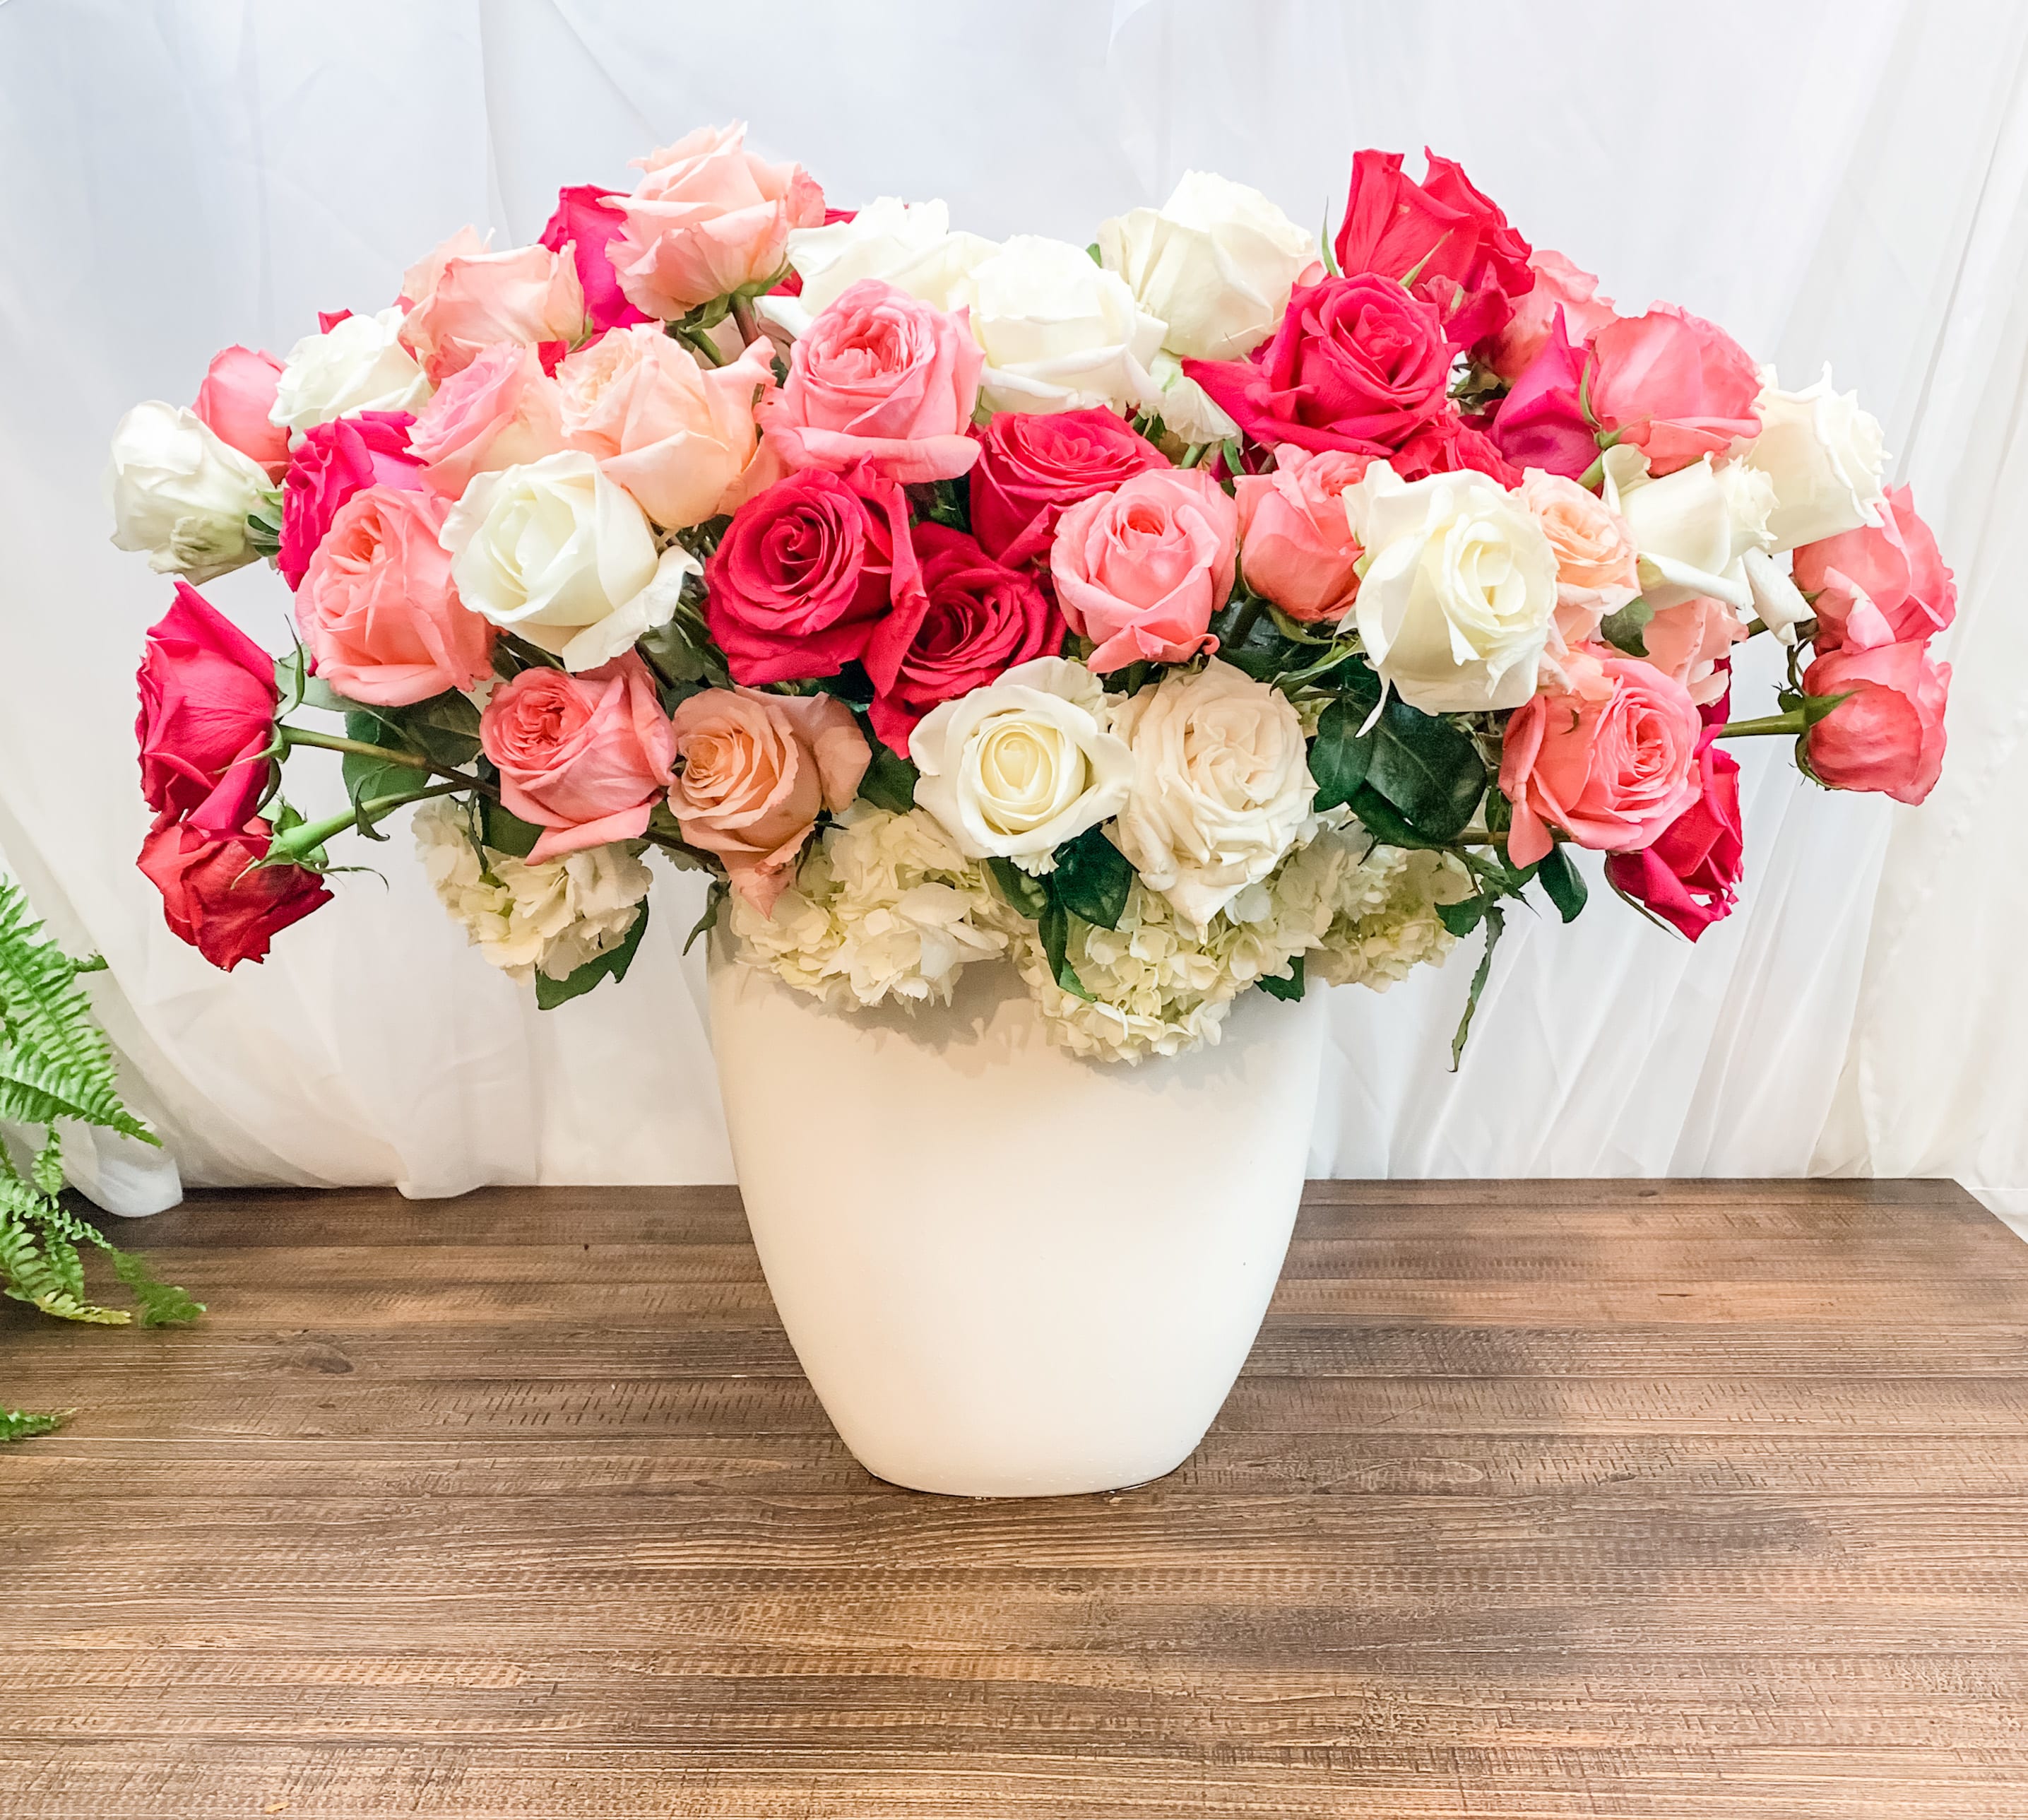 Forever in Love - Large, luscious arrangement of premium white and pink roses. Vase may vary depending on availability